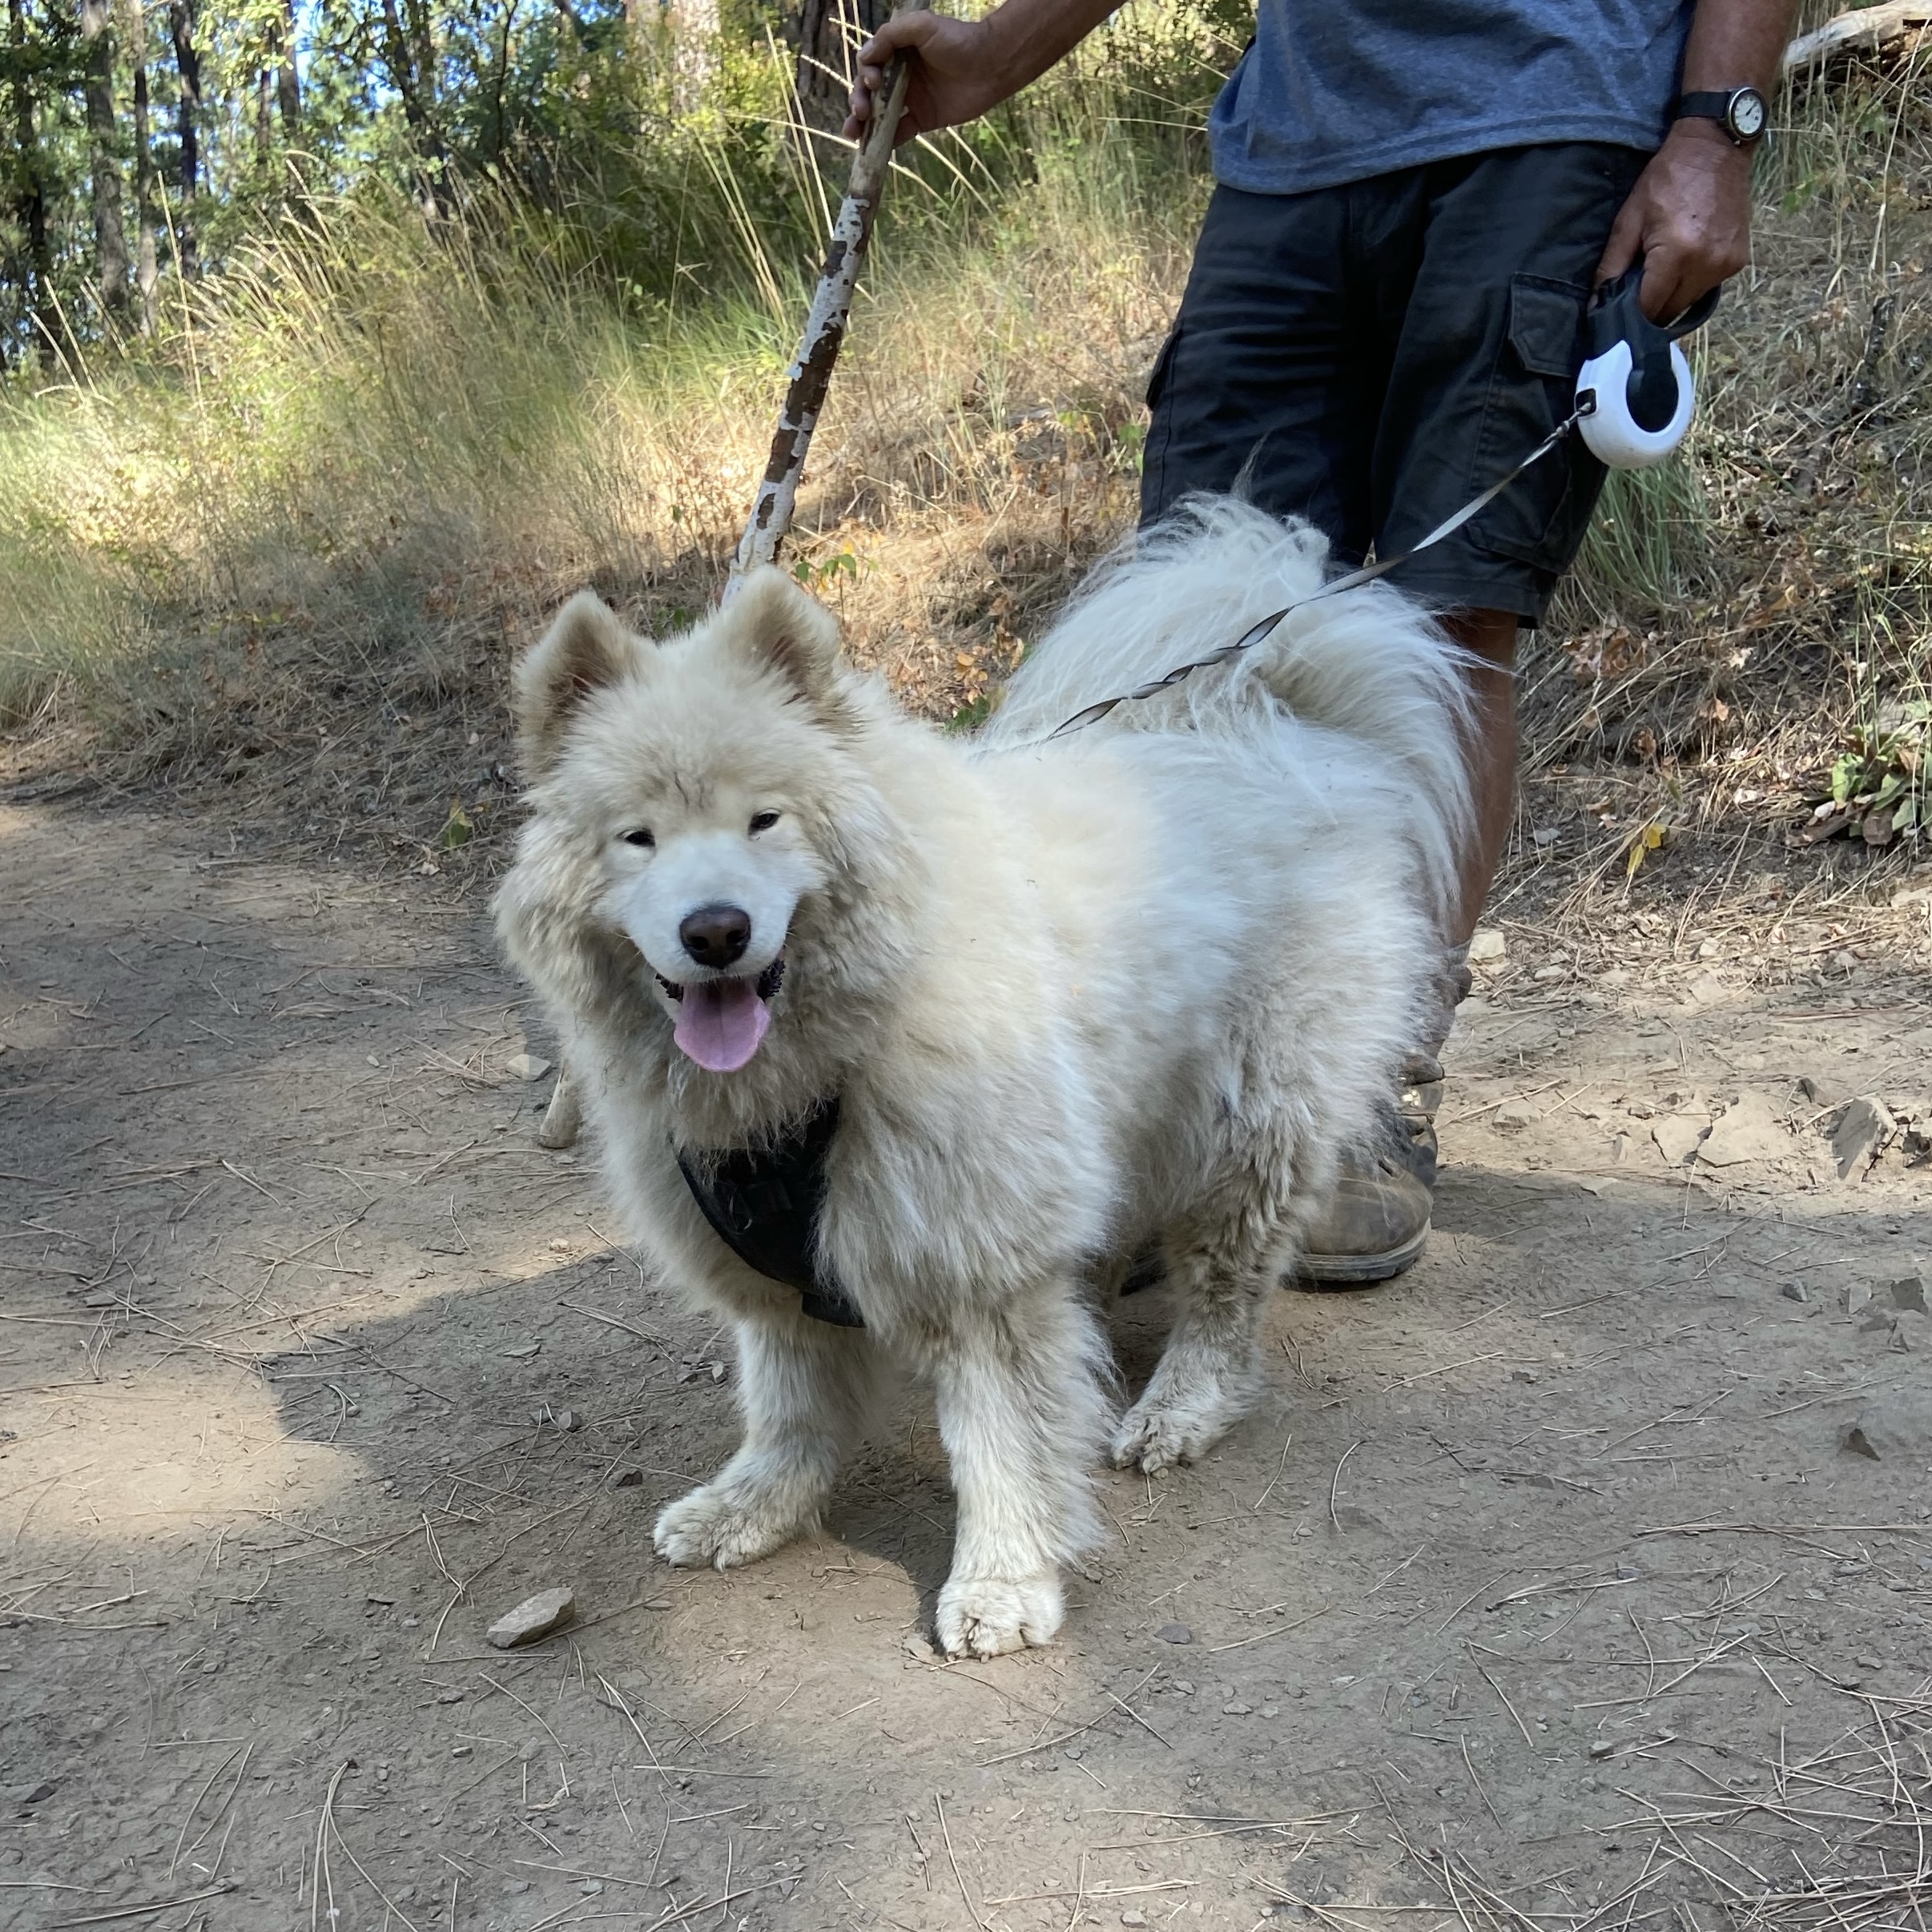 A very dirty and scruffy looking Samoyed coming back from a hike up a mountain